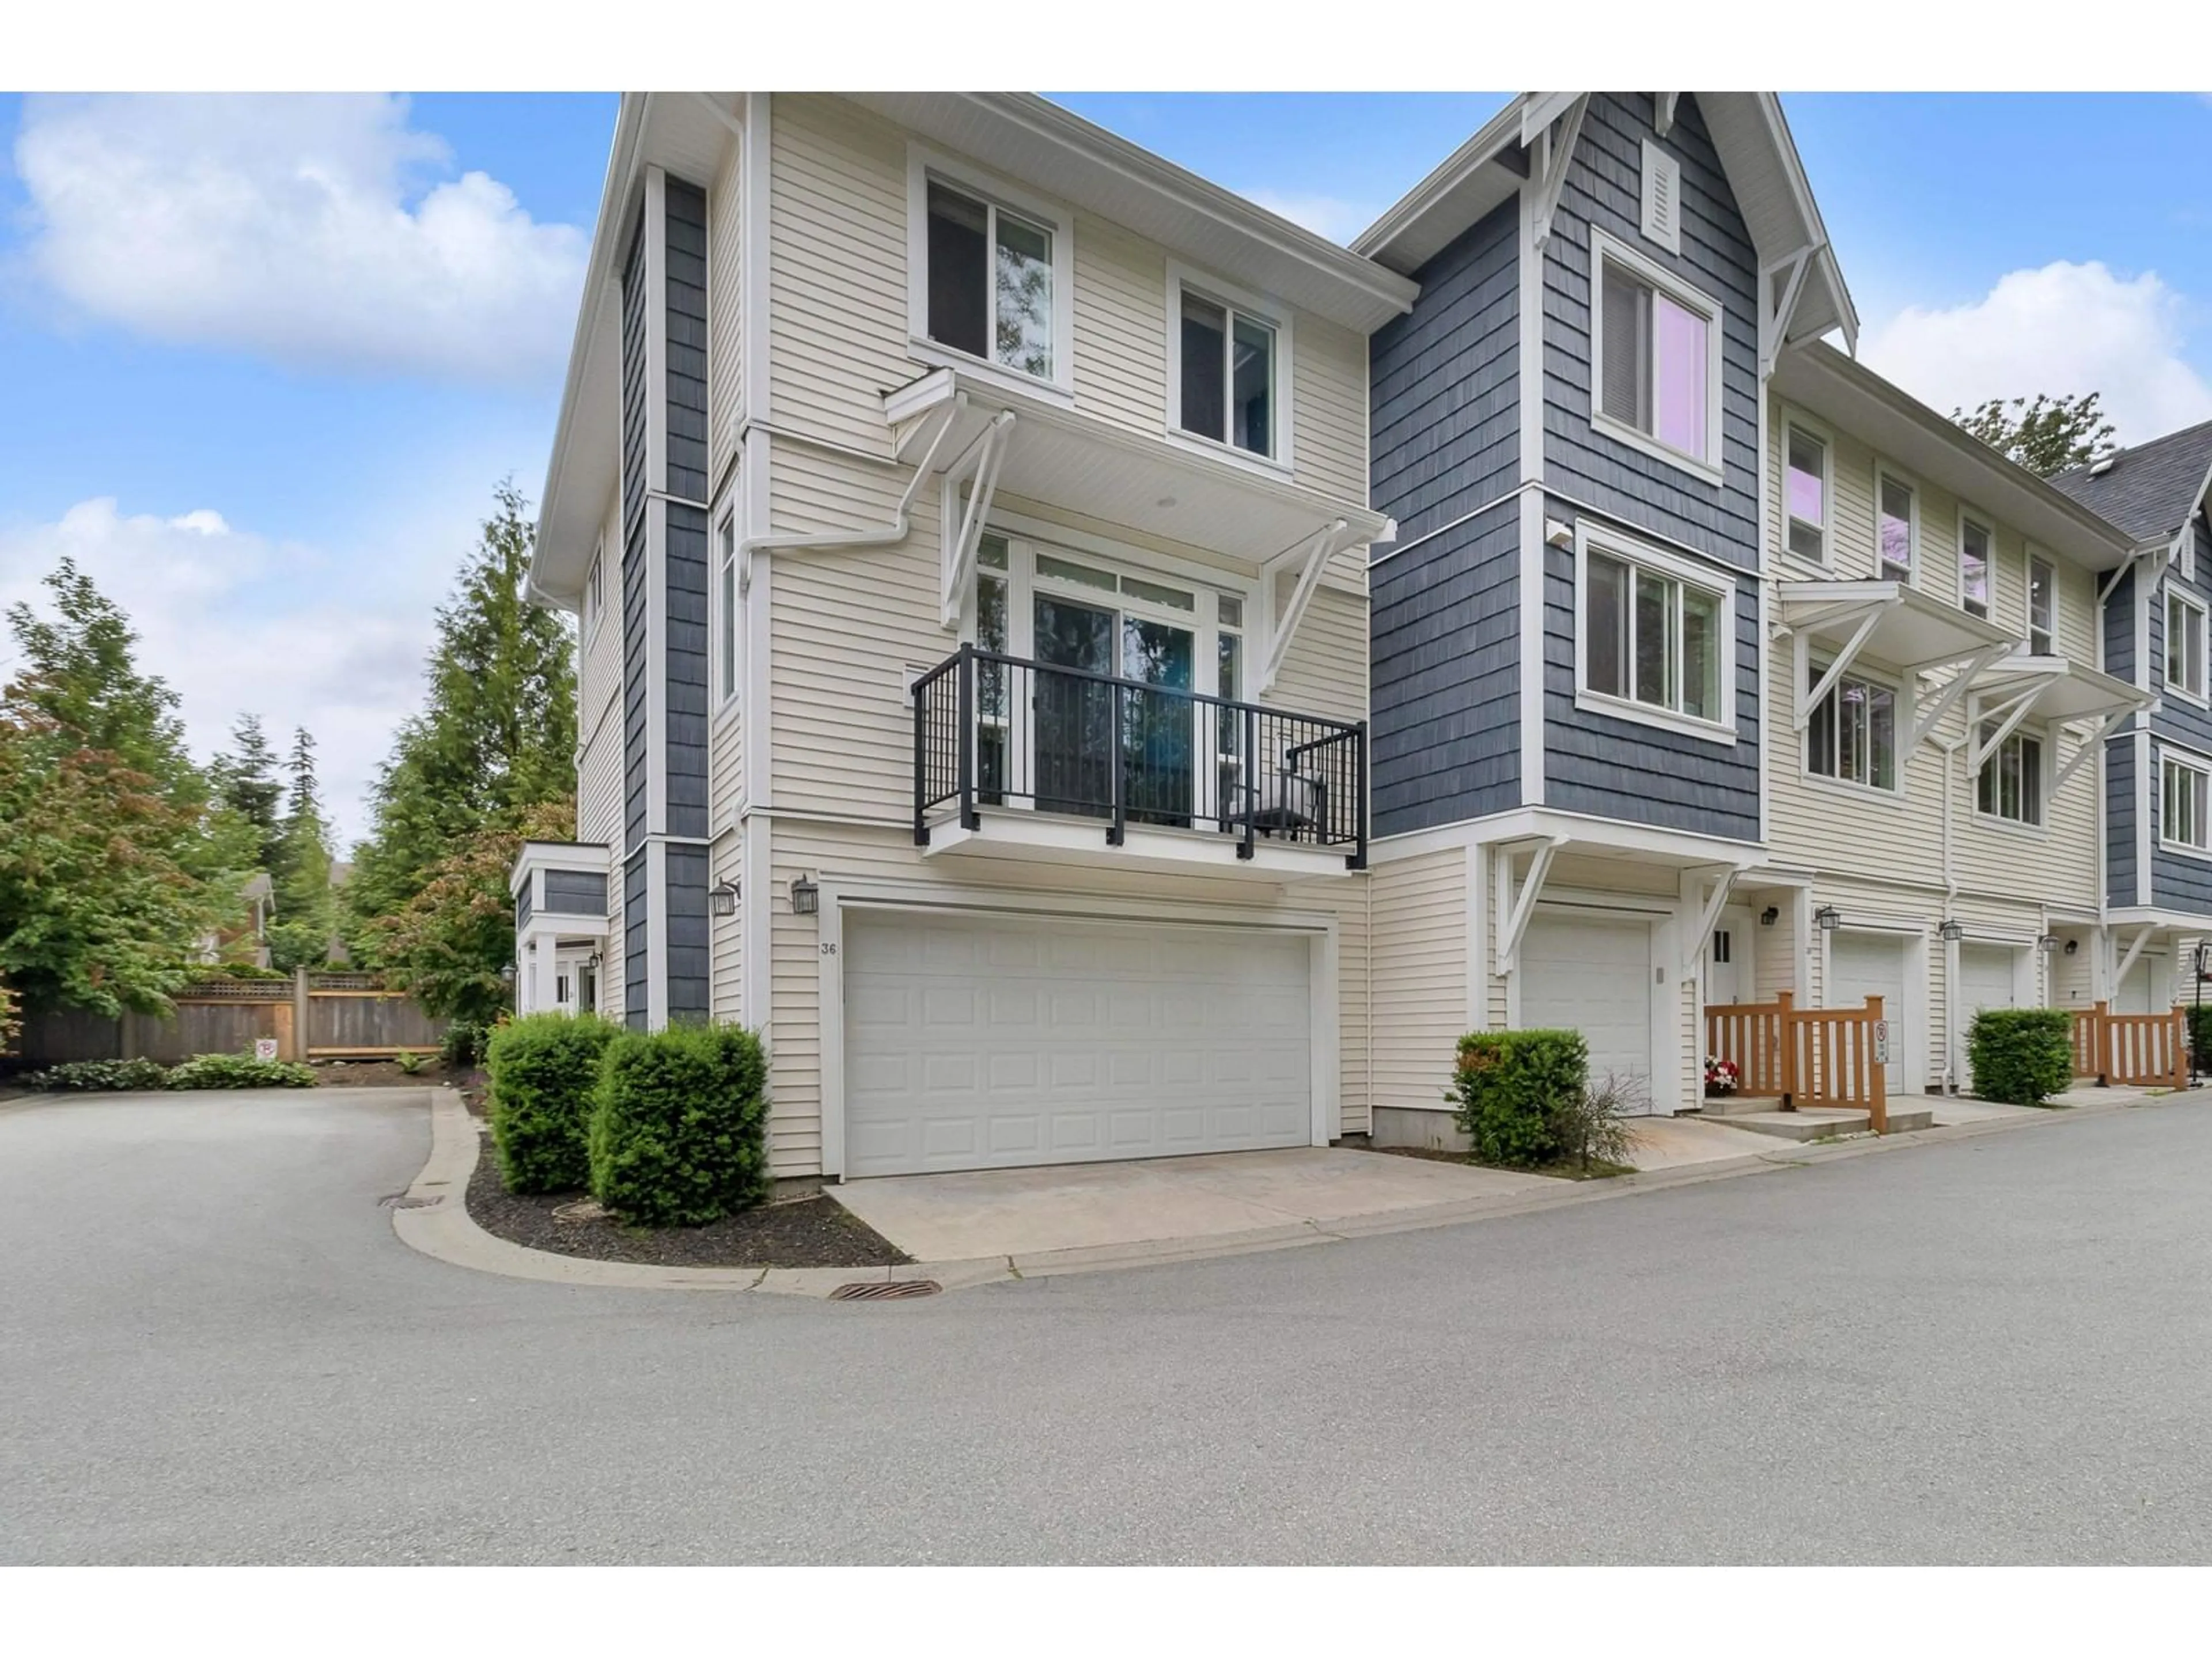 A pic from exterior of the house or condo for 36 3039 156 STREET, Surrey British Columbia V3Z6T5